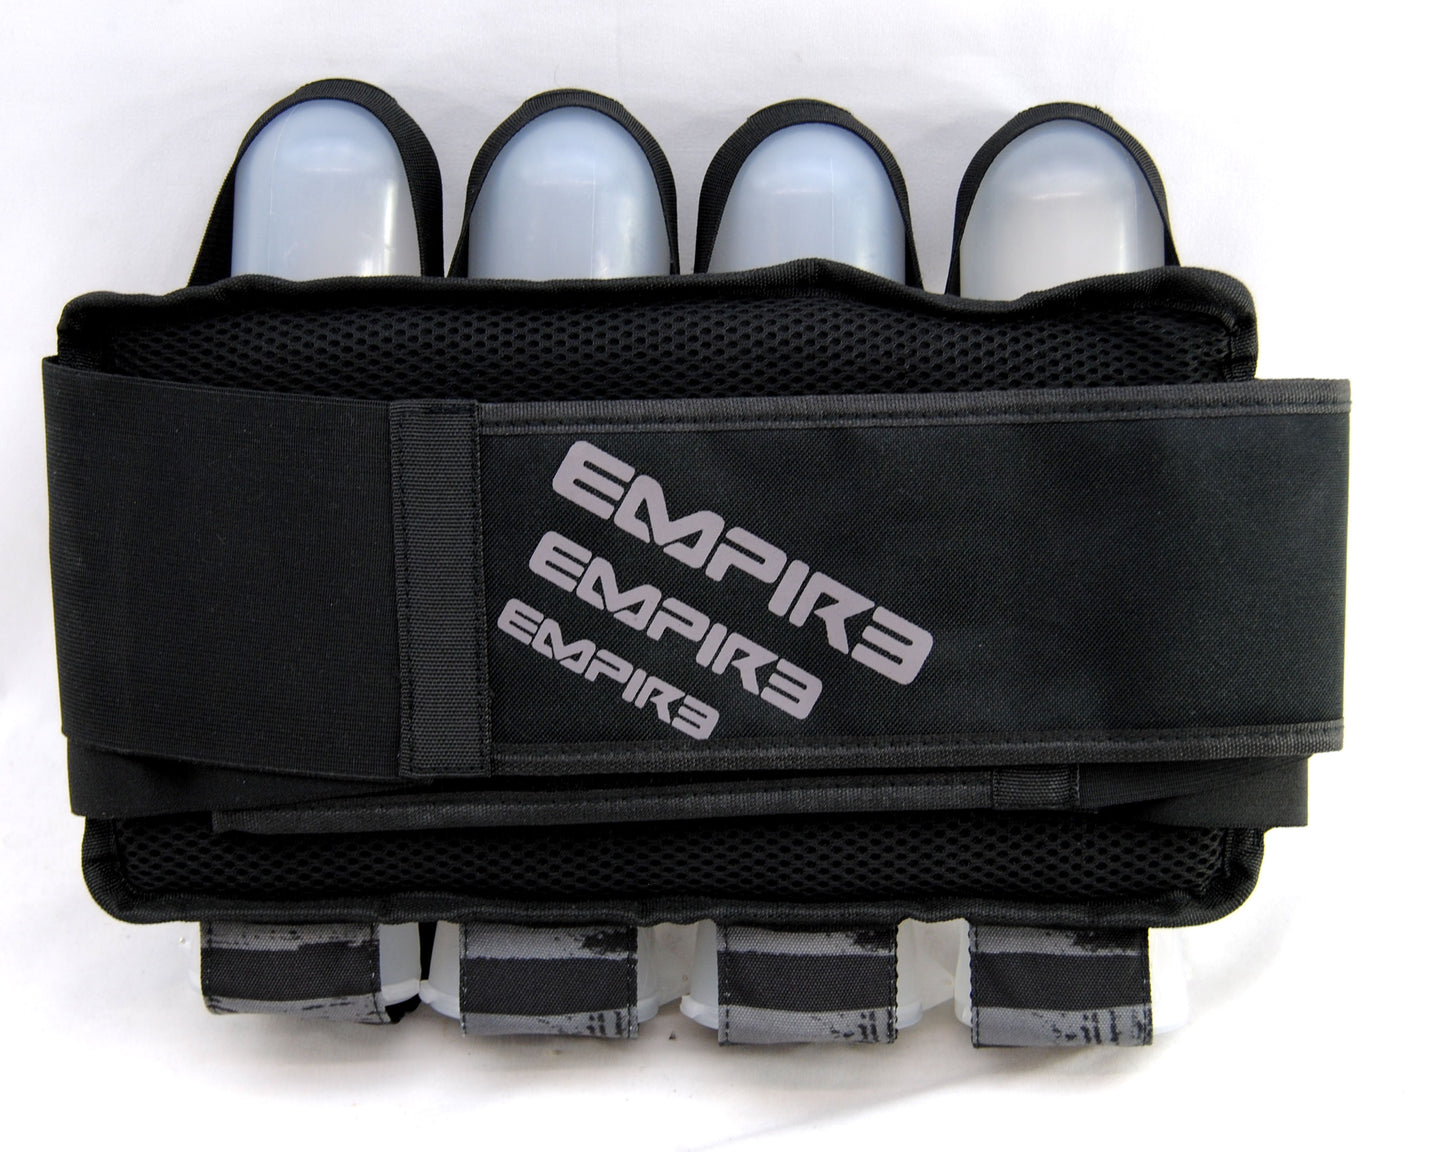 Empire Omega Paintball 4 Pod Harness - CoLab Exclusive